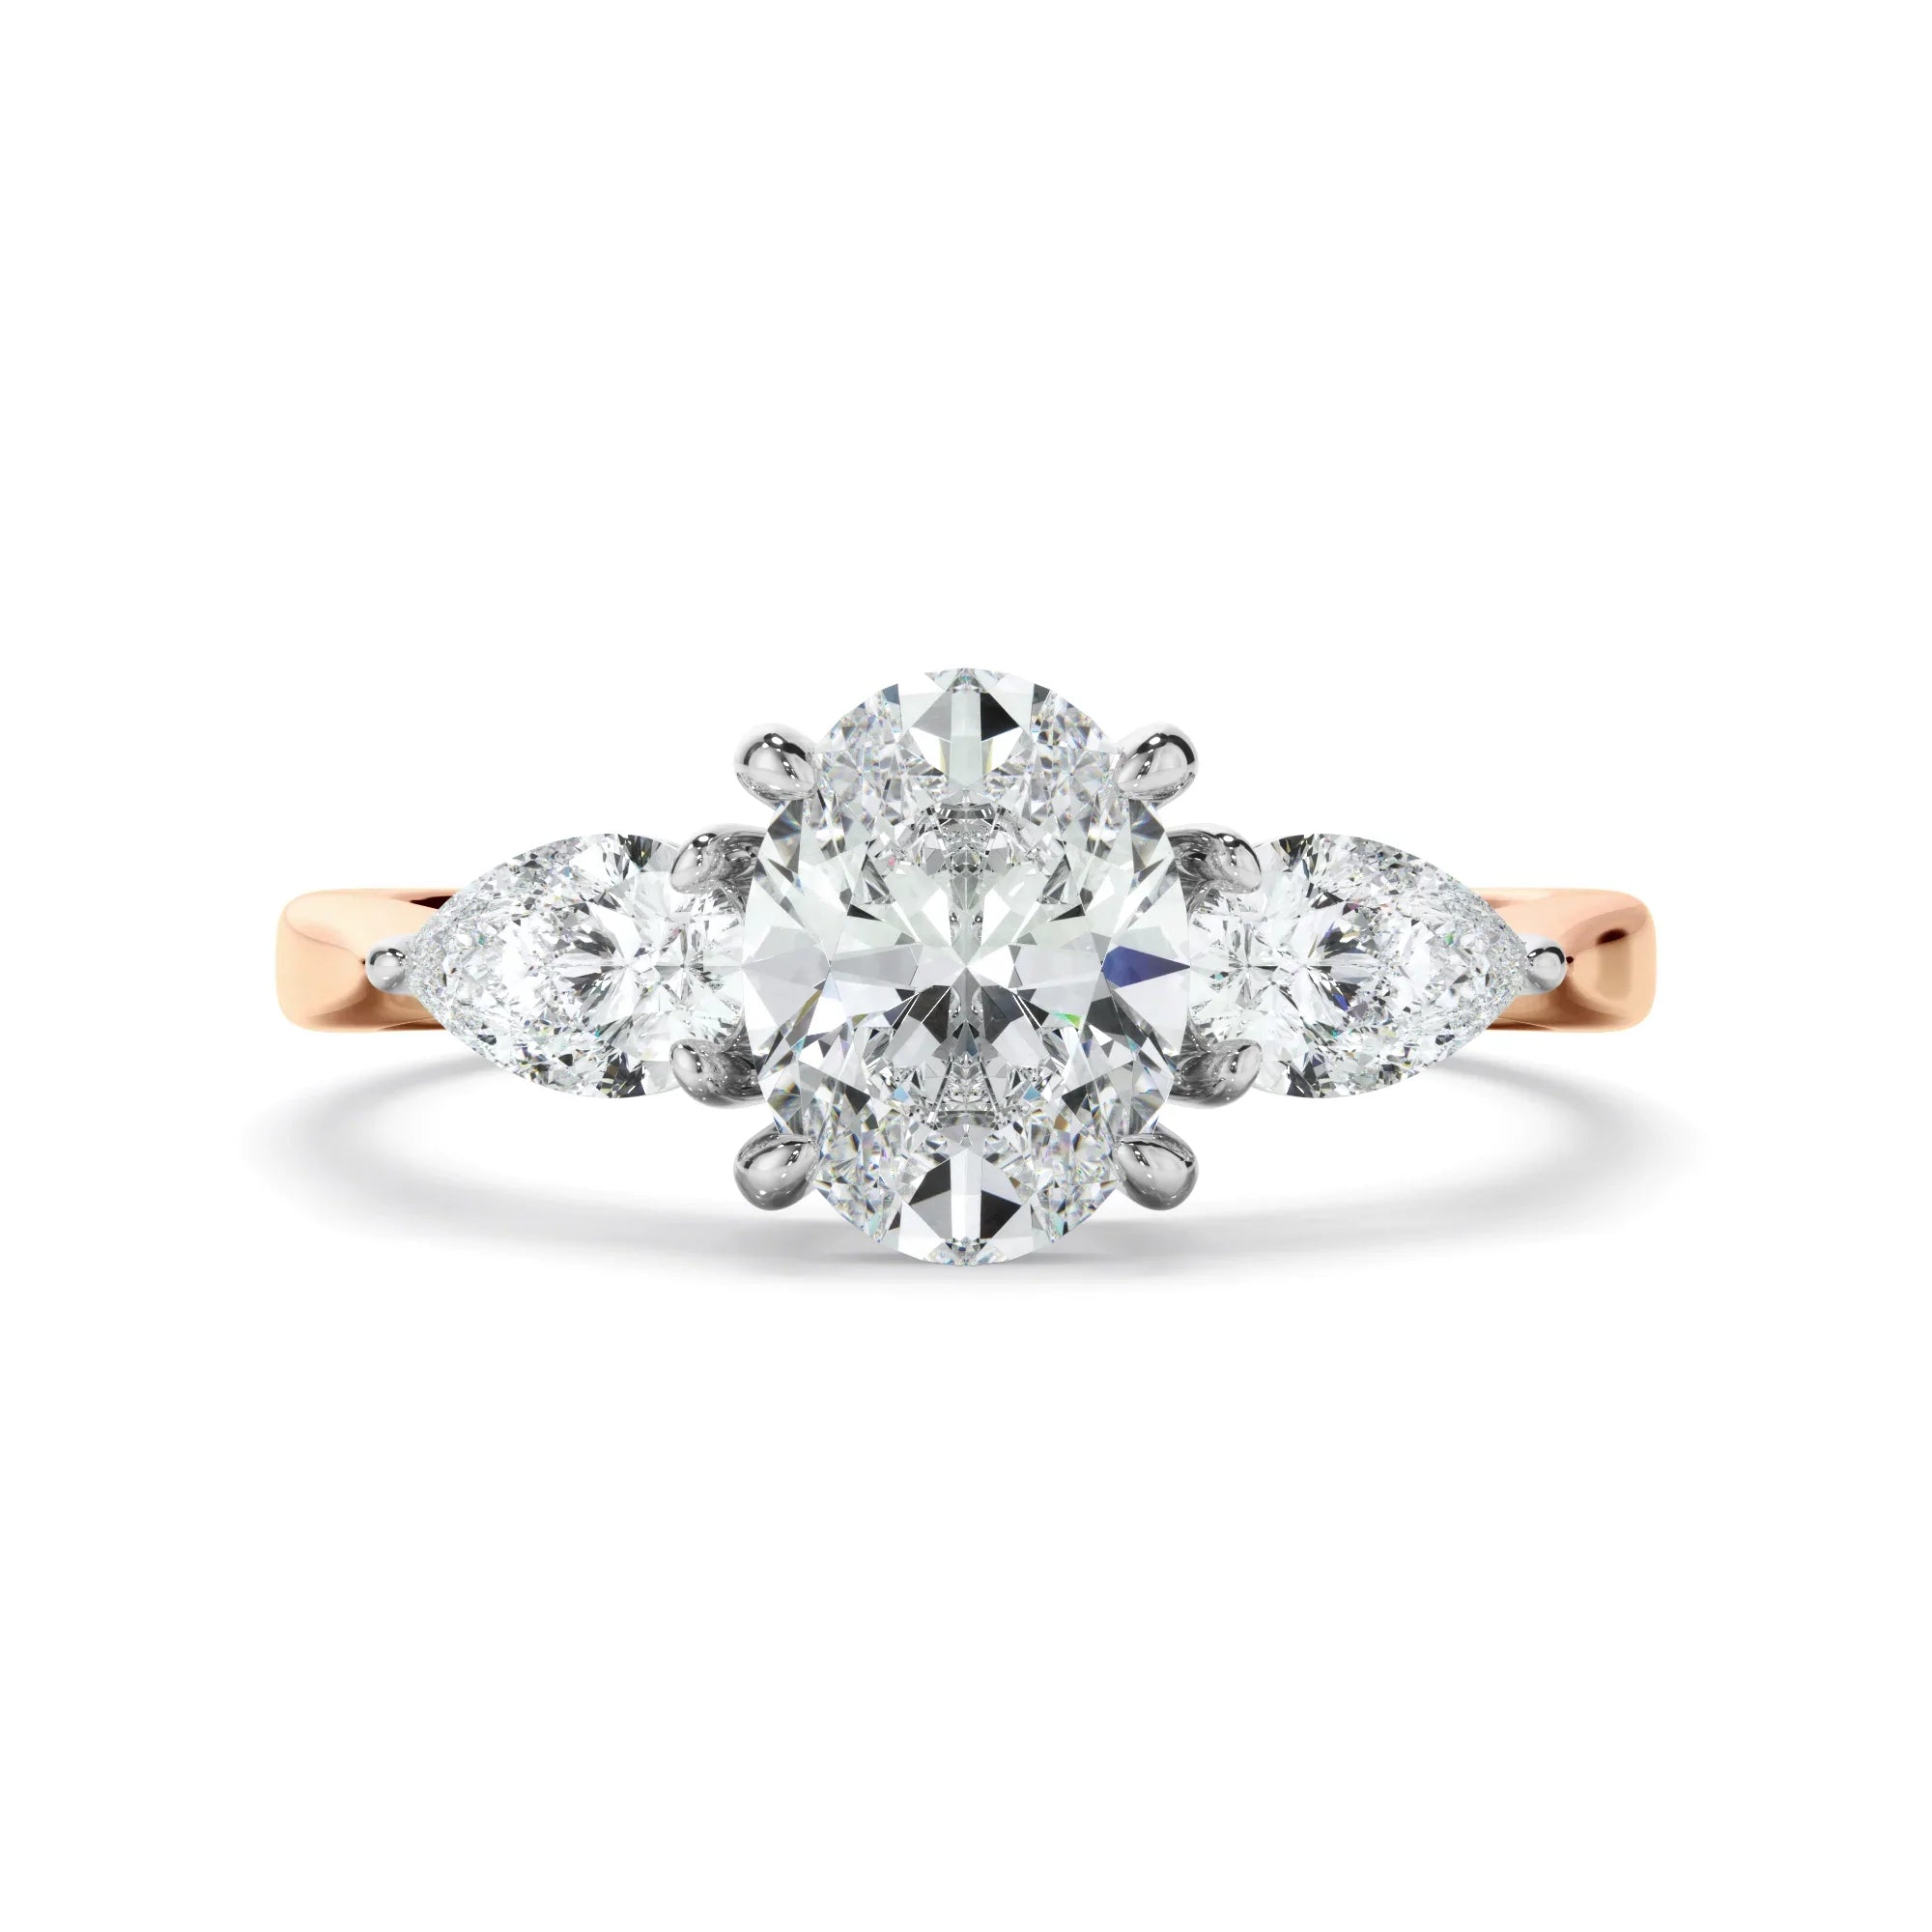 Oval Cut Diamond Engagement Ring With Pear Cut Diamond Sides